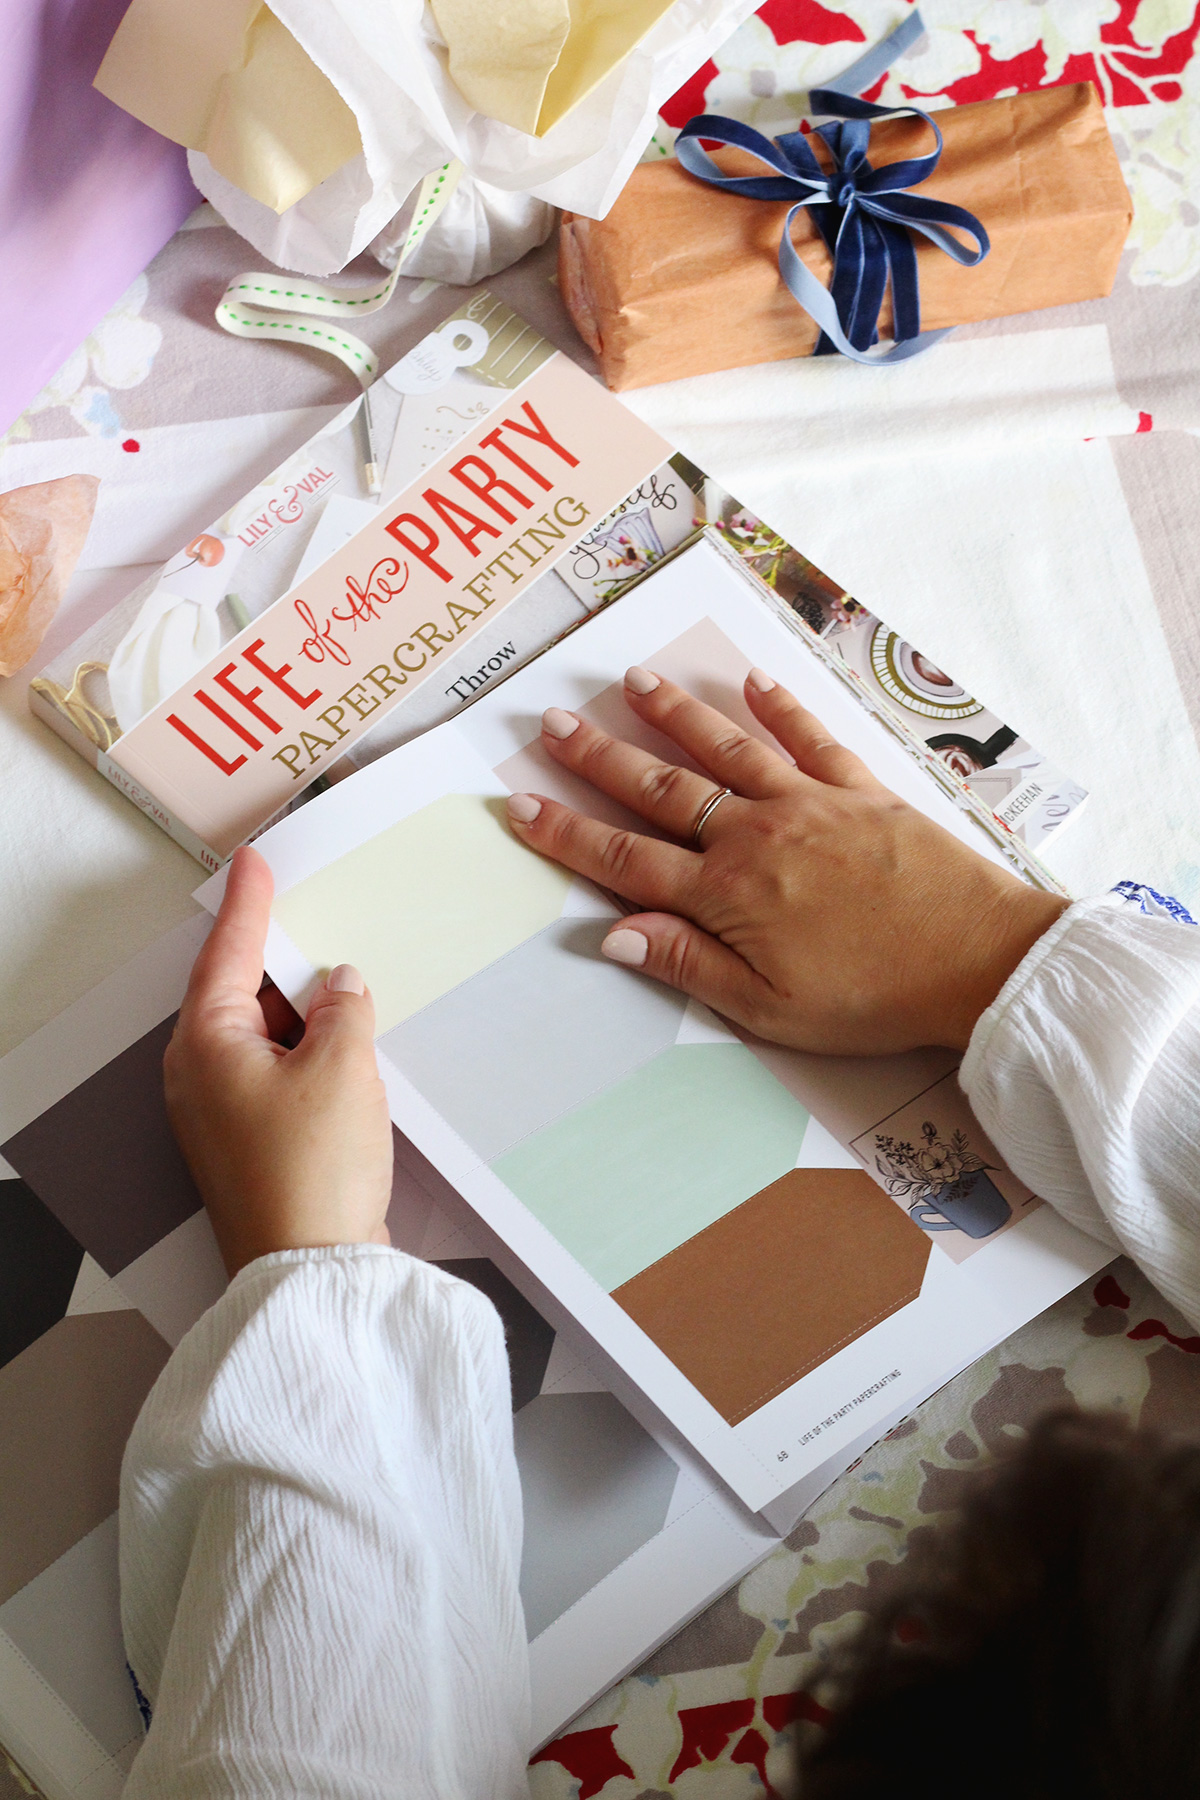 Life Of The Party Papercrafting is an entire book of paper crafts for parties. Perfect for paper lovers and scrapbookers!